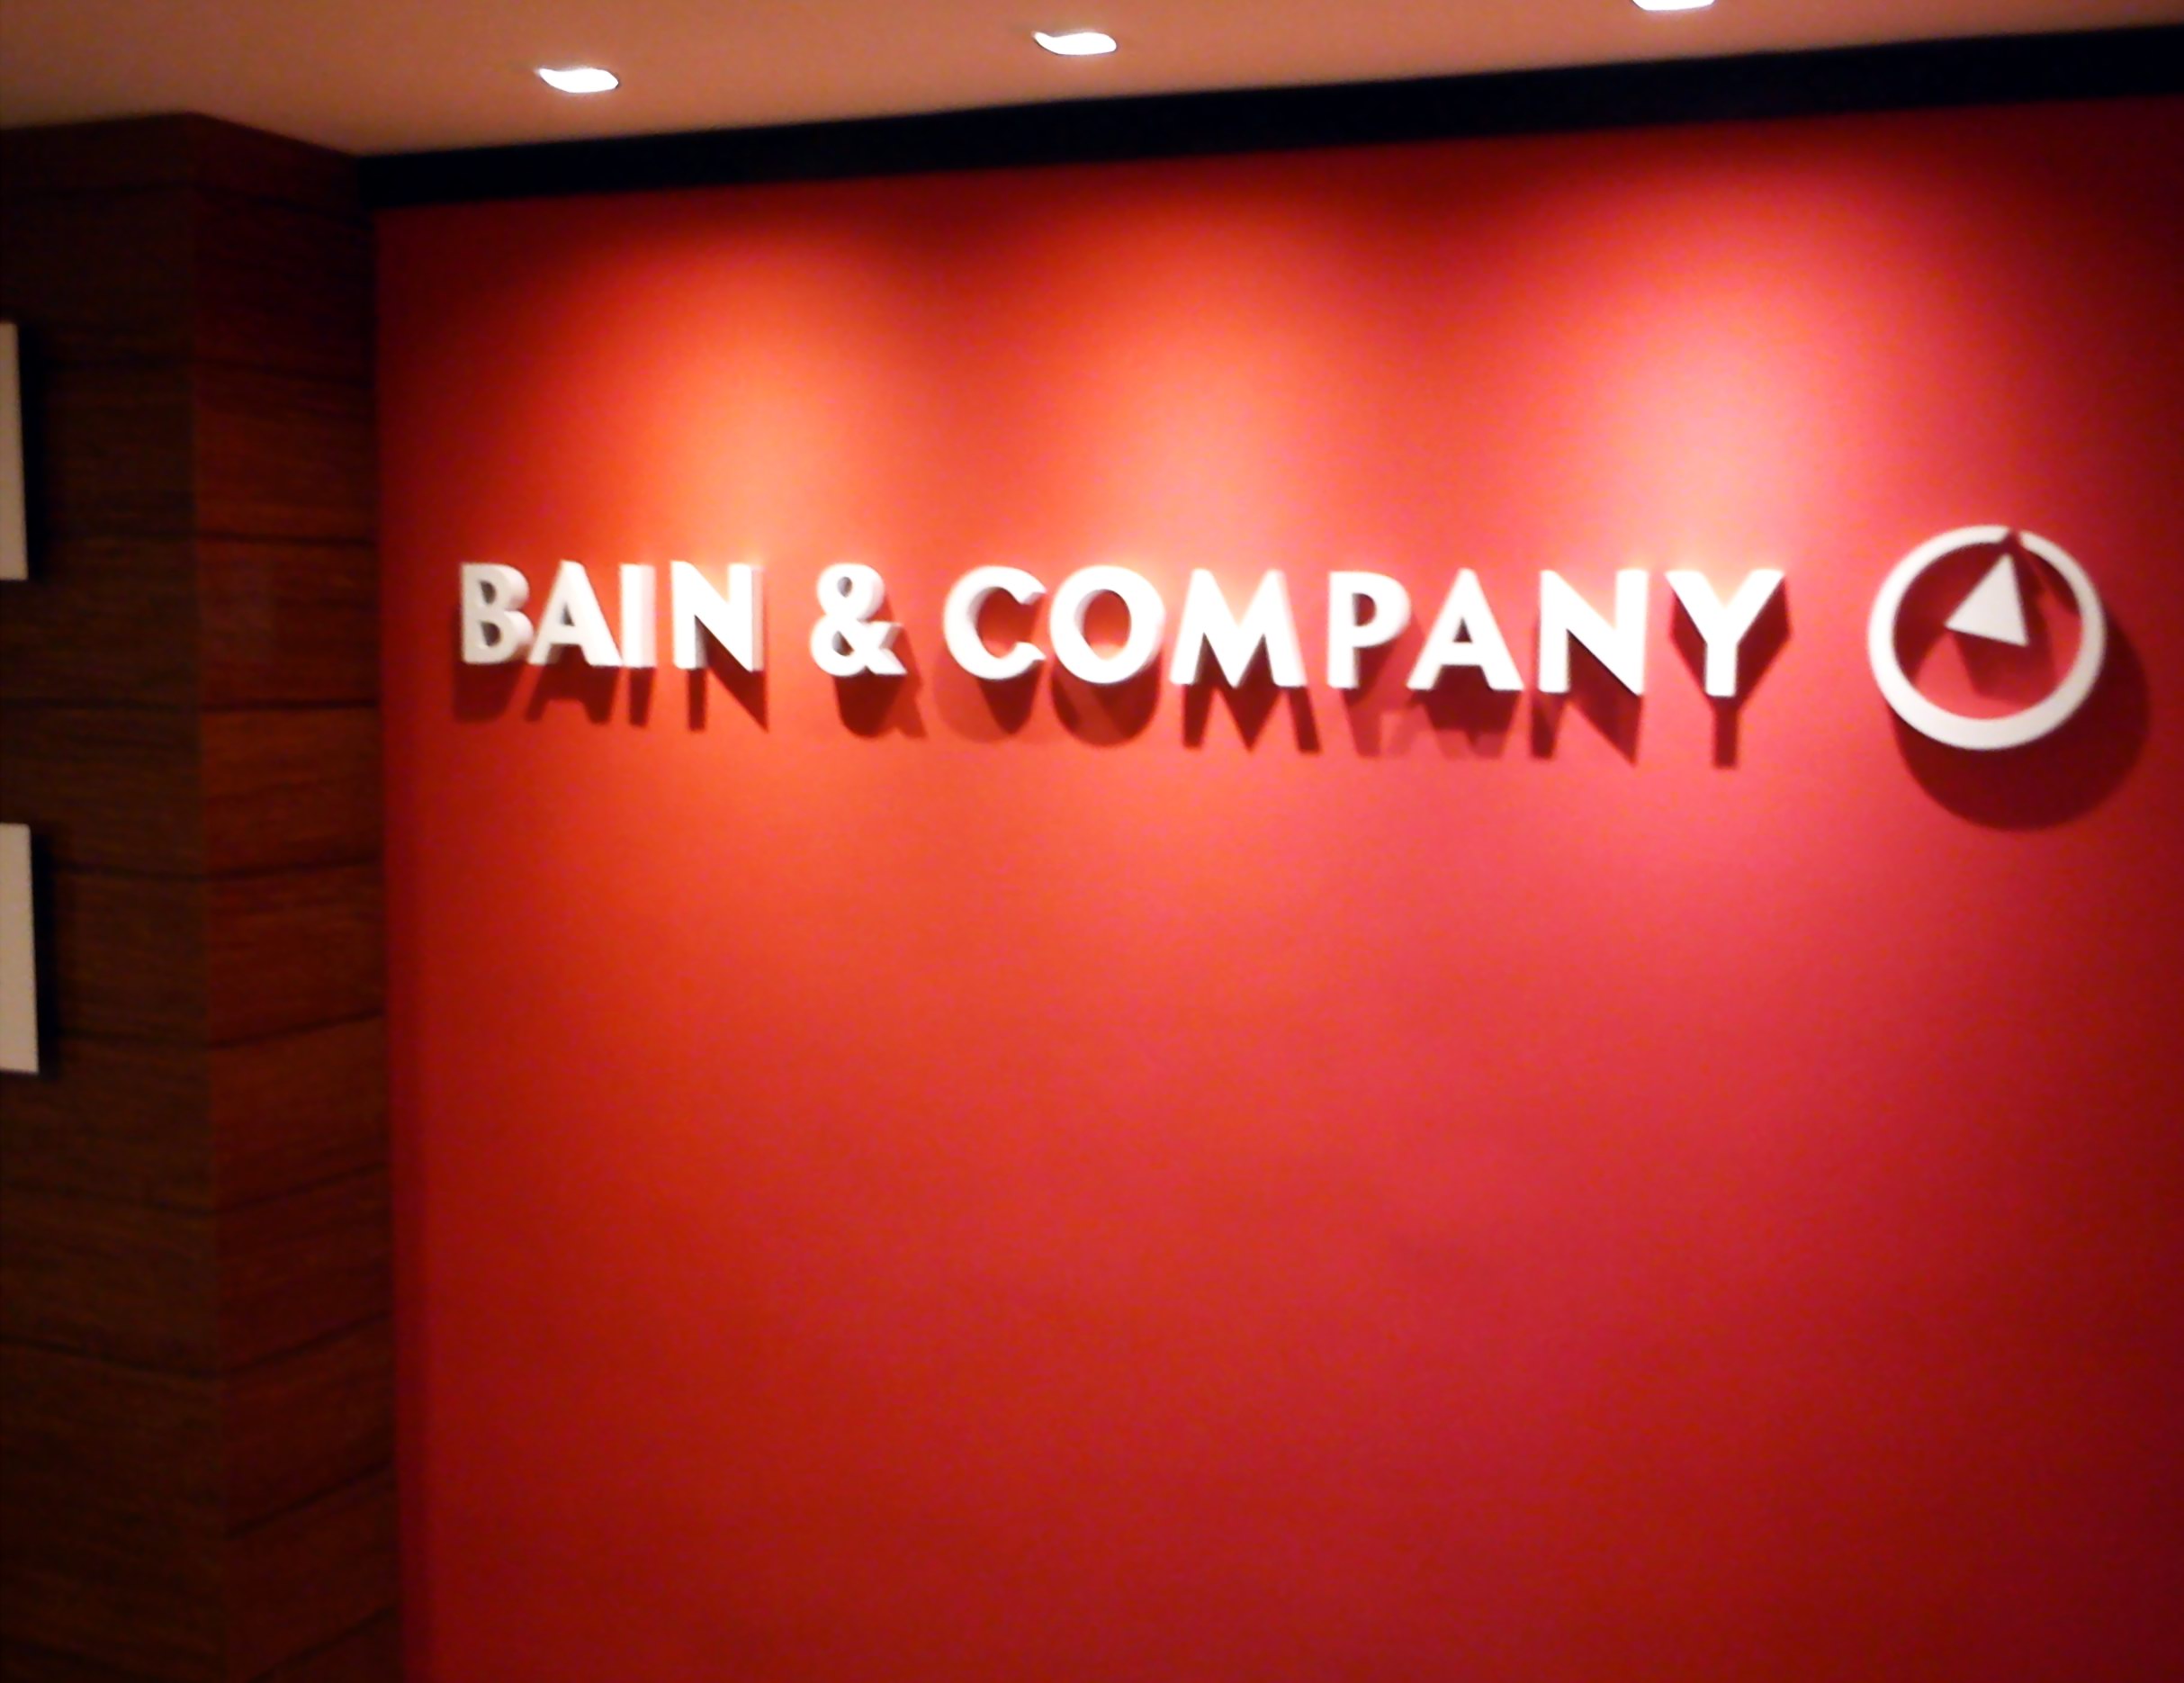 Bain & Co. Working as Consultant on Abu Dhabi NBAD-FGB Merger